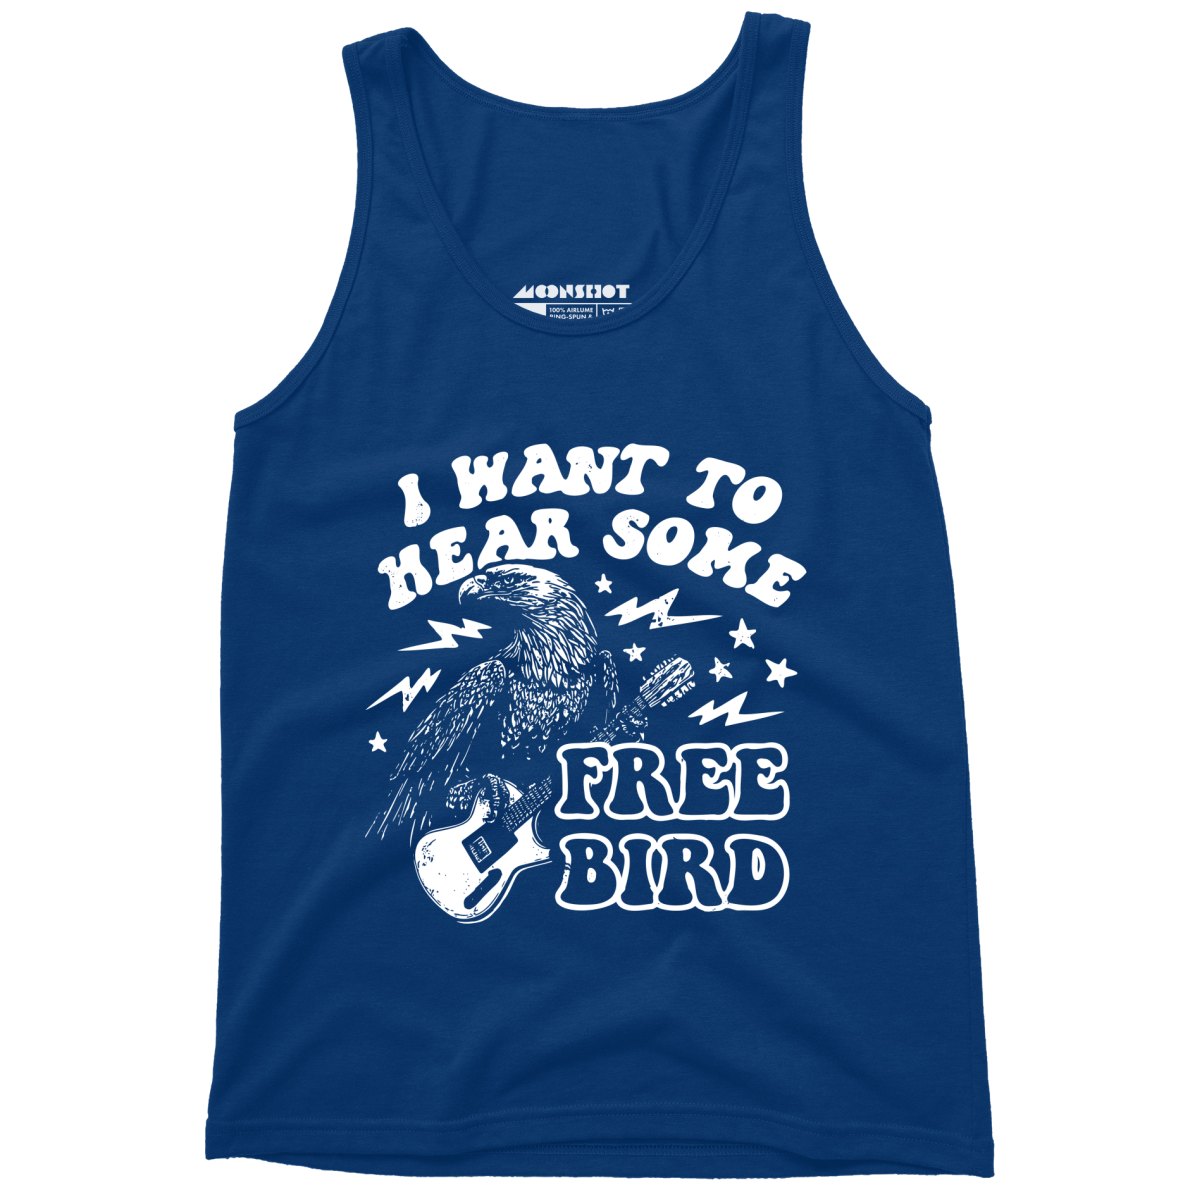 I Want to Hear Some Free Bird - Unisex Tank Top